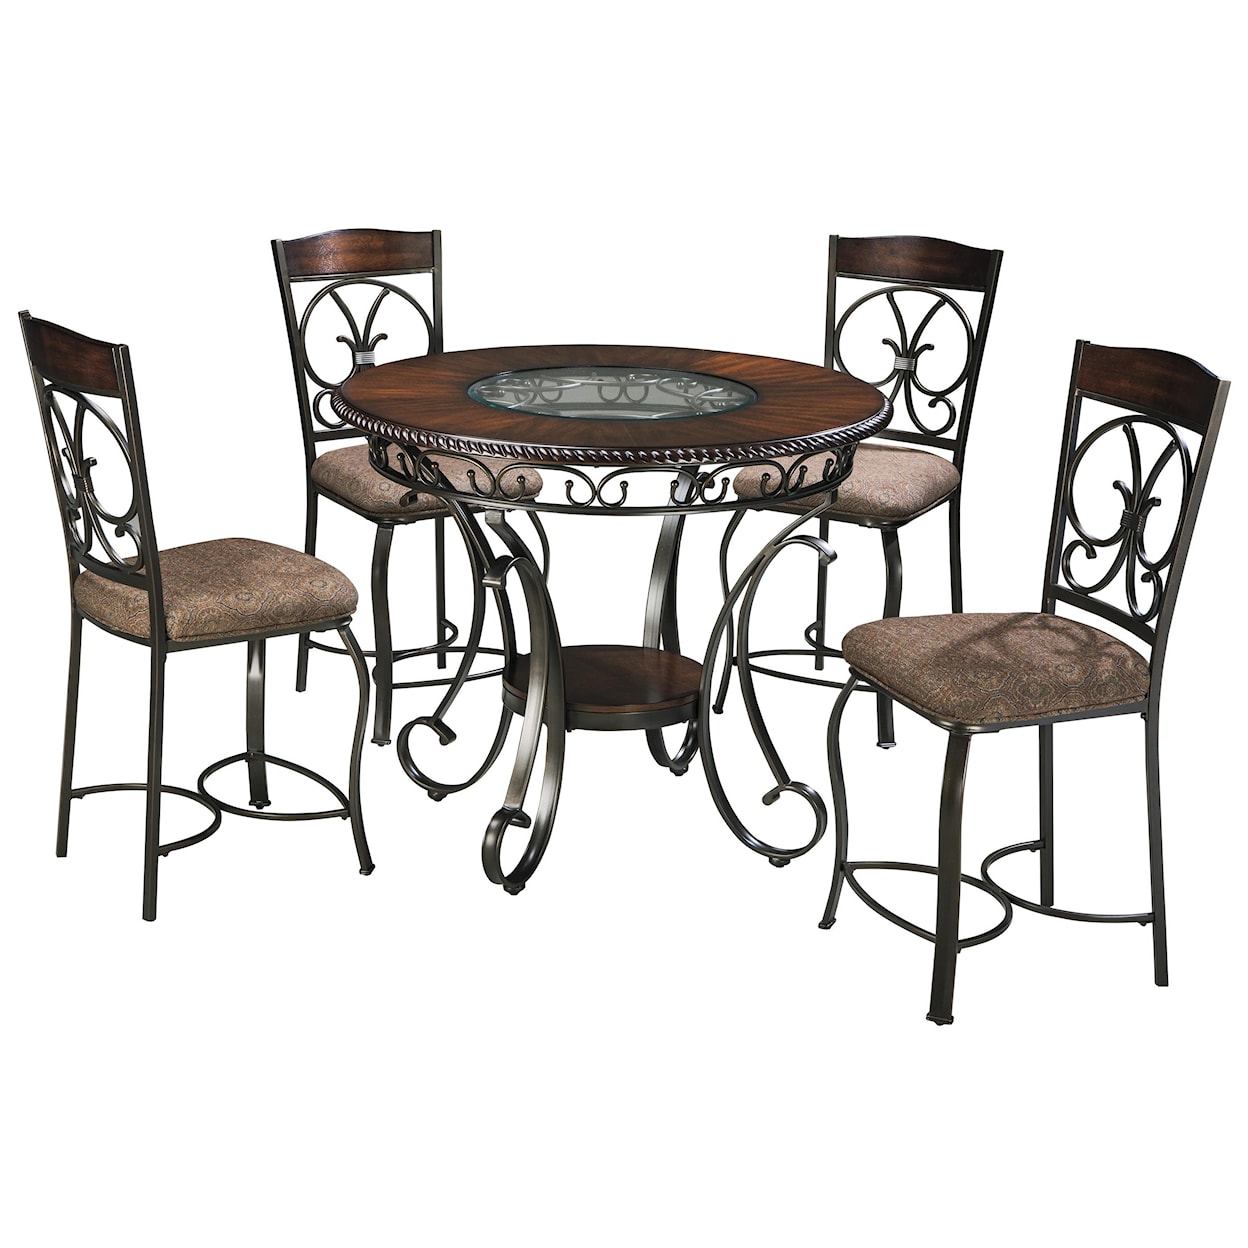 Signature Design by Ashley Glambrey Round Dining Table and Chair Set